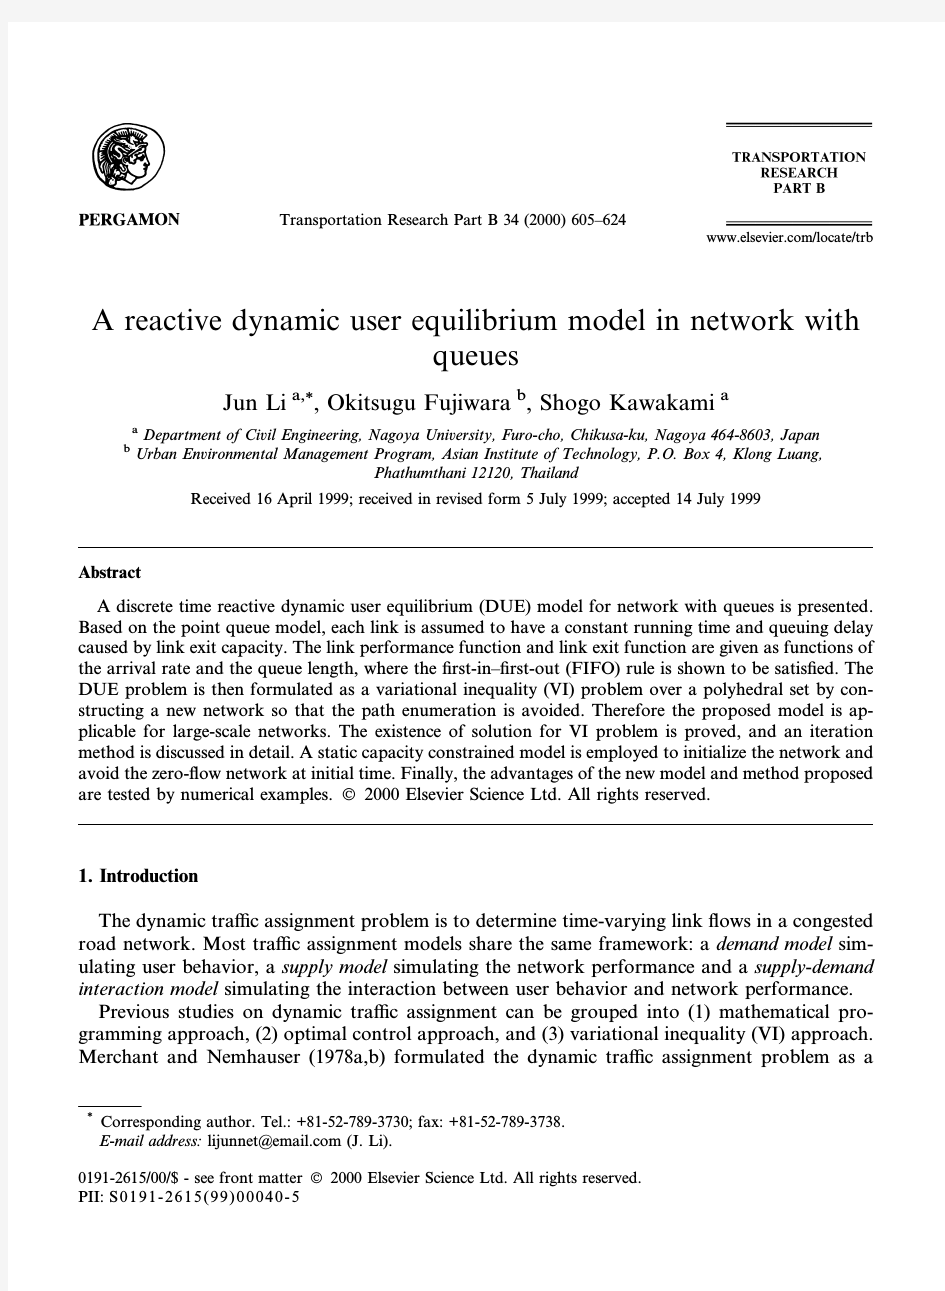 A reactive dynamic user equilibrium model in network with queues